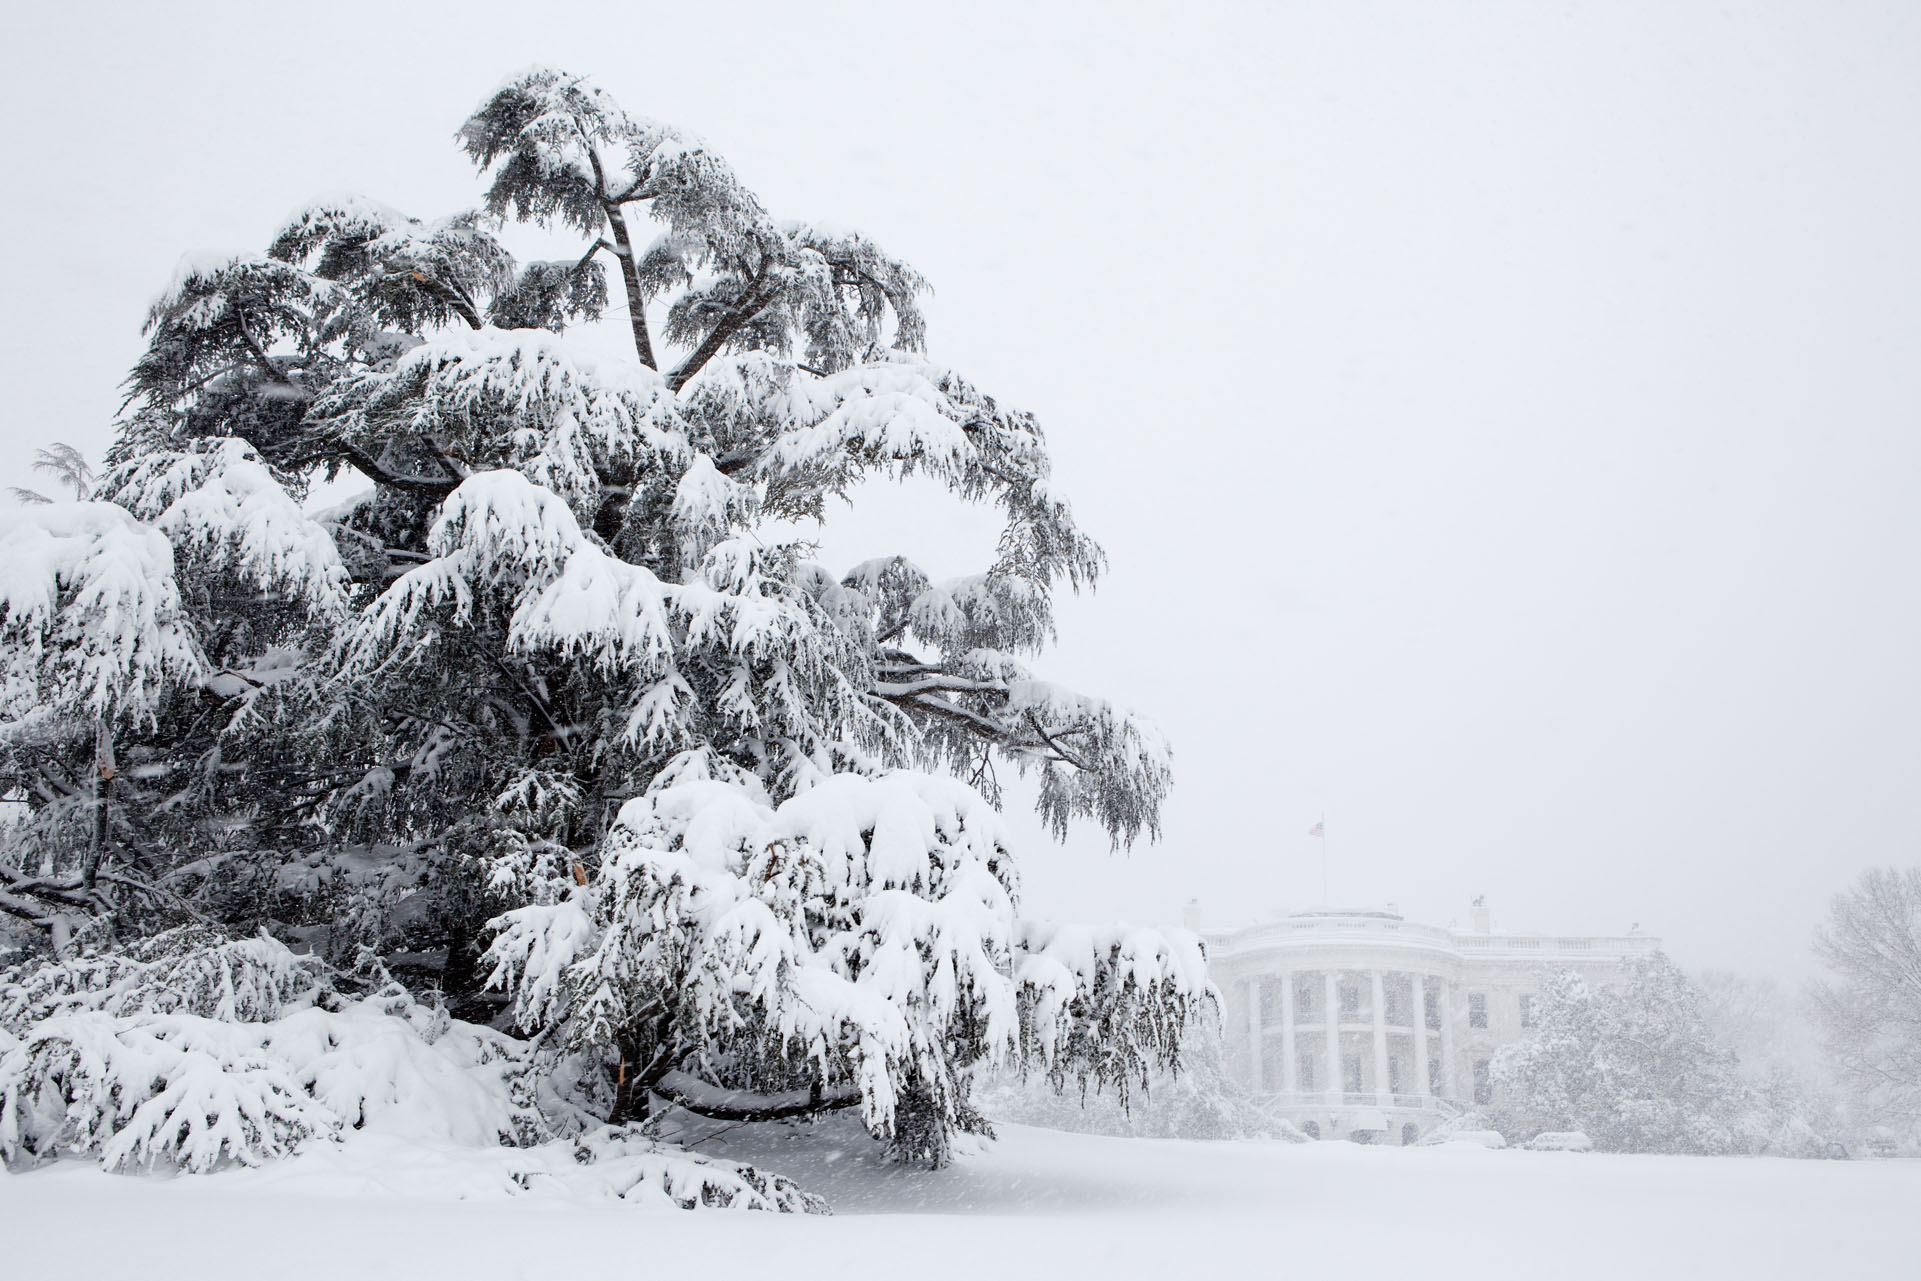 The White House is Blanketed in Snow